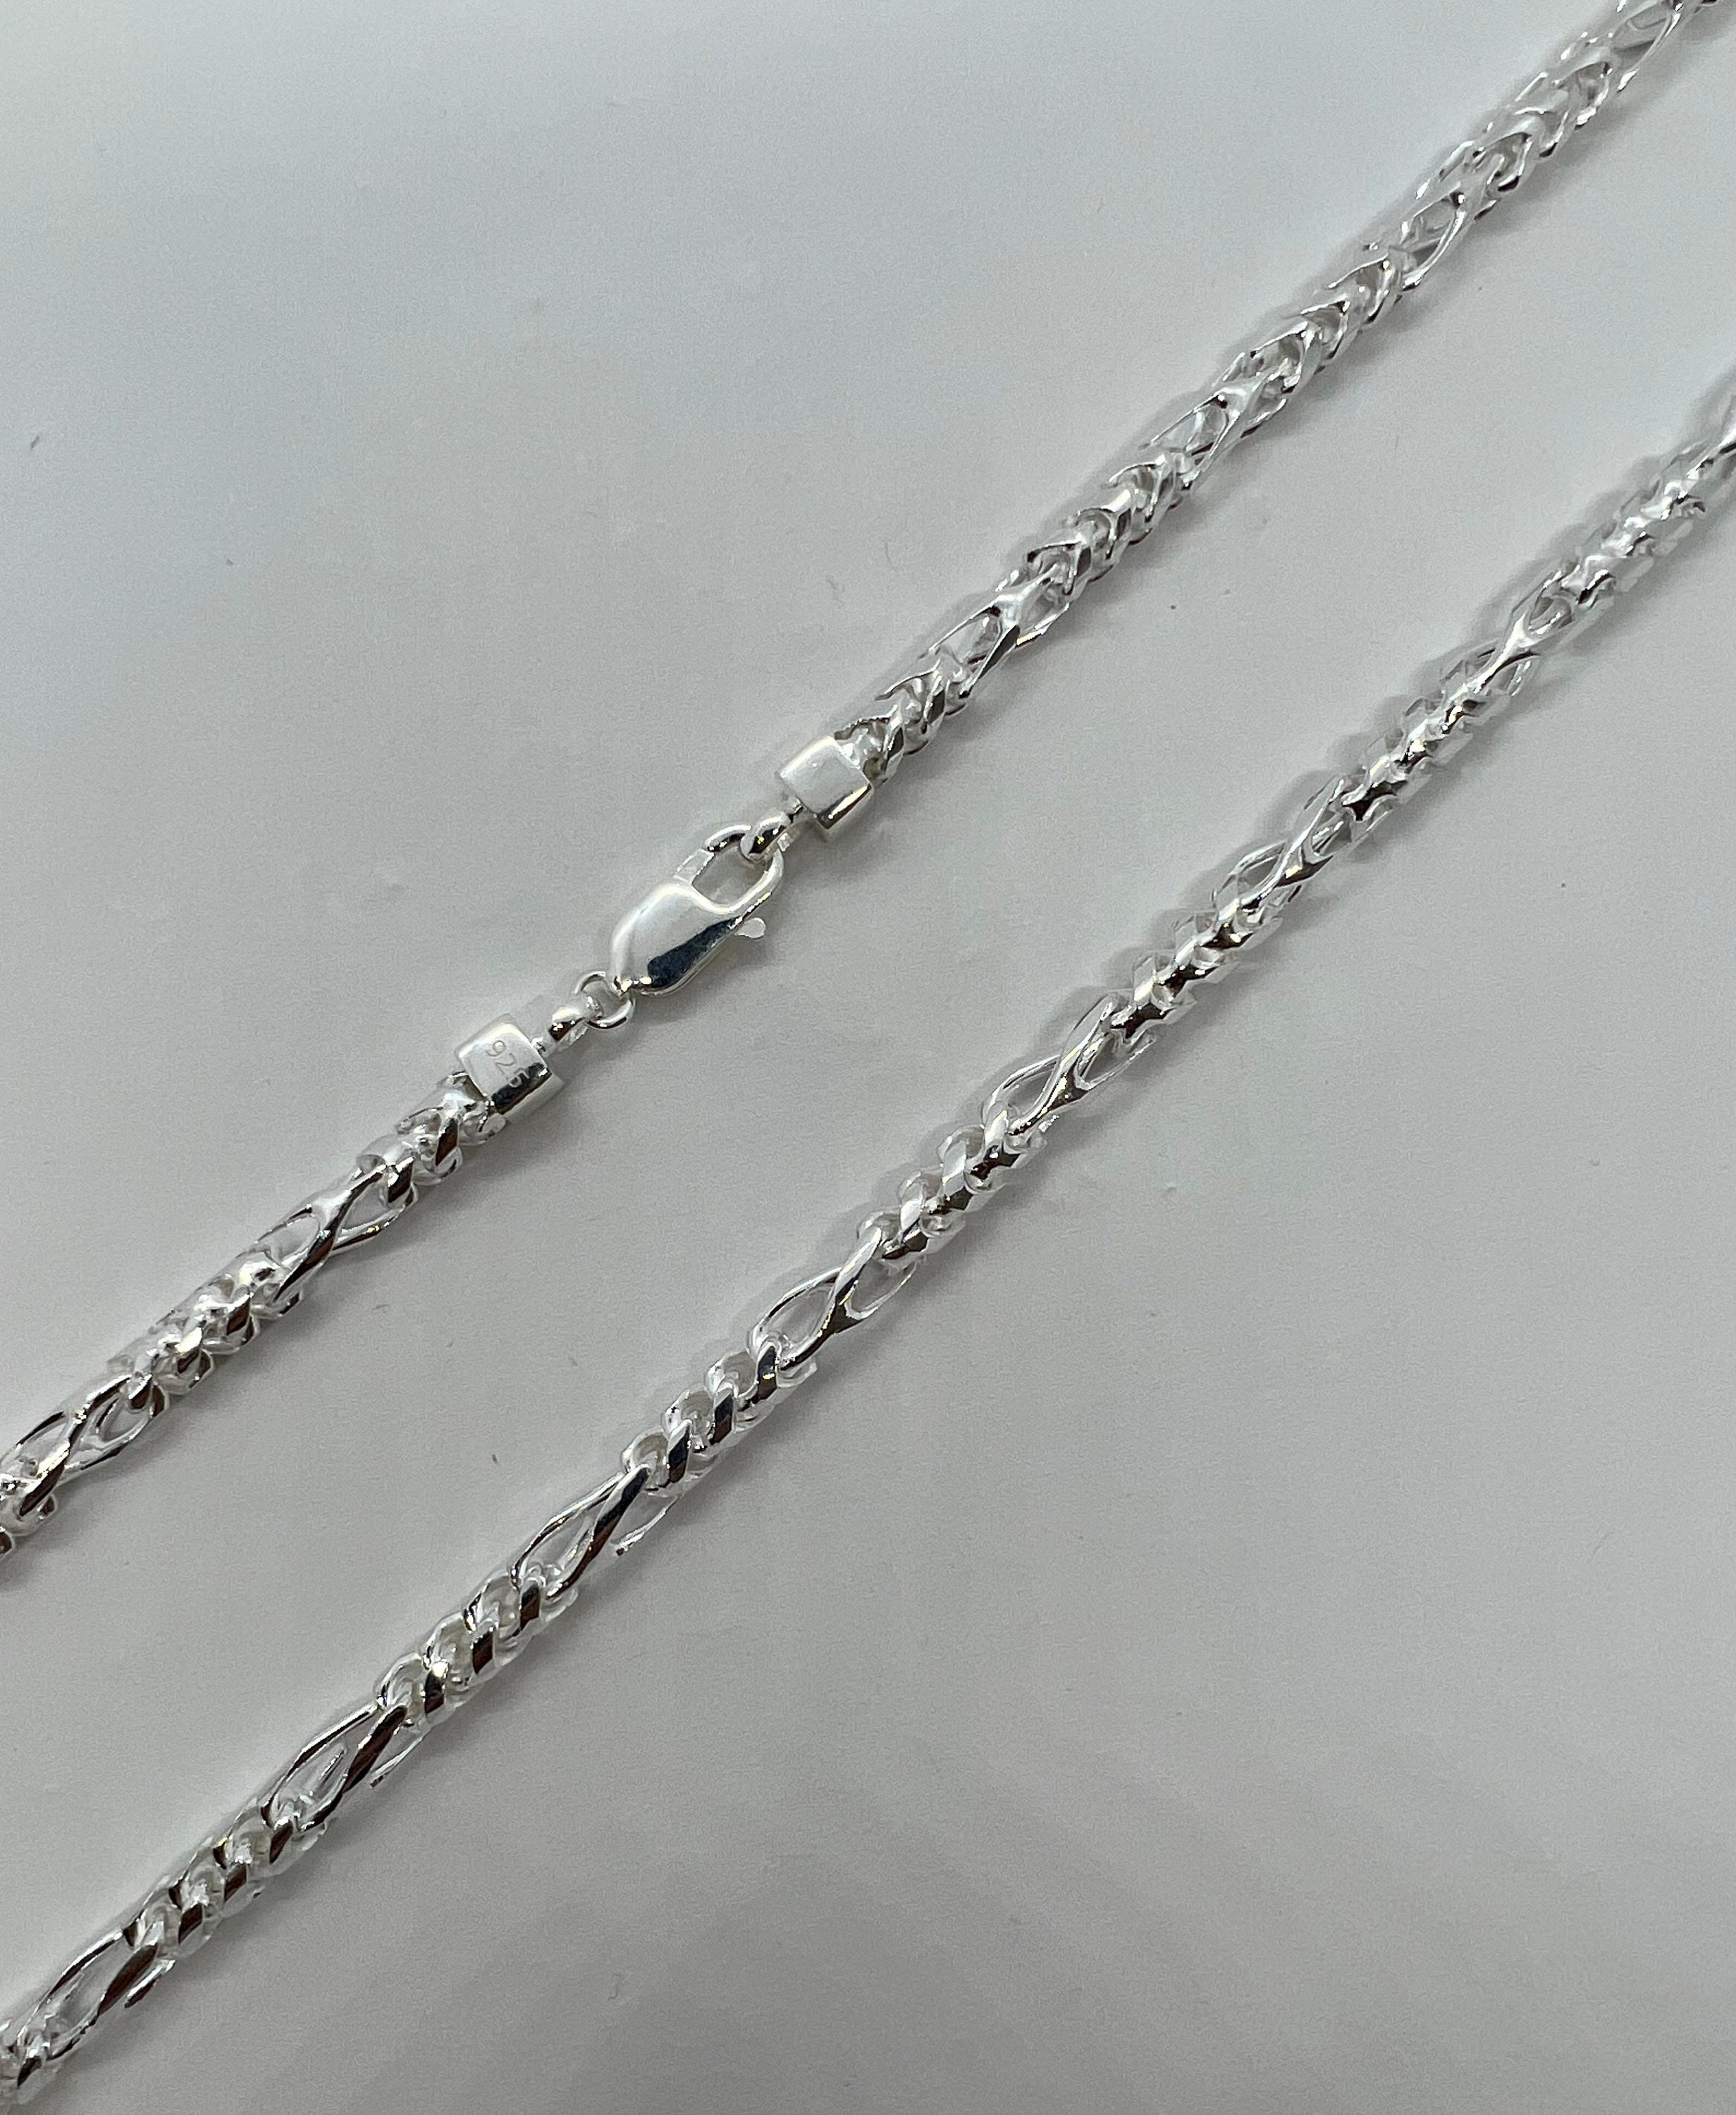 5mm Silver Franco Chain, Silver Chain for Men, Proclamation Jewelry